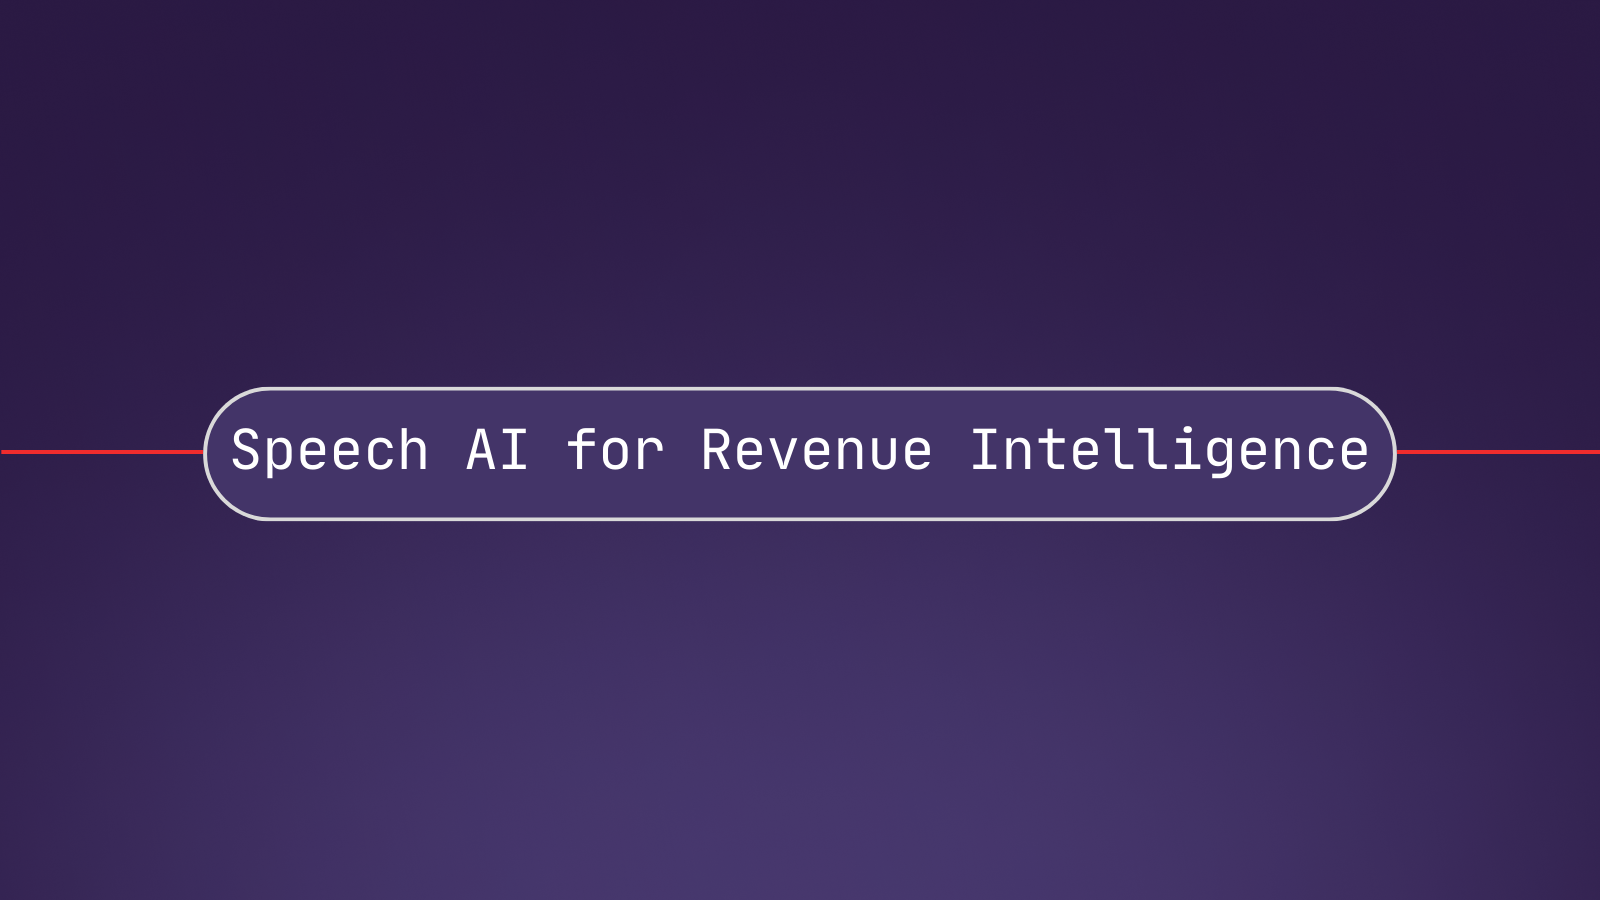 Top 3 benefits of Speech AI for Revenue Intelligence